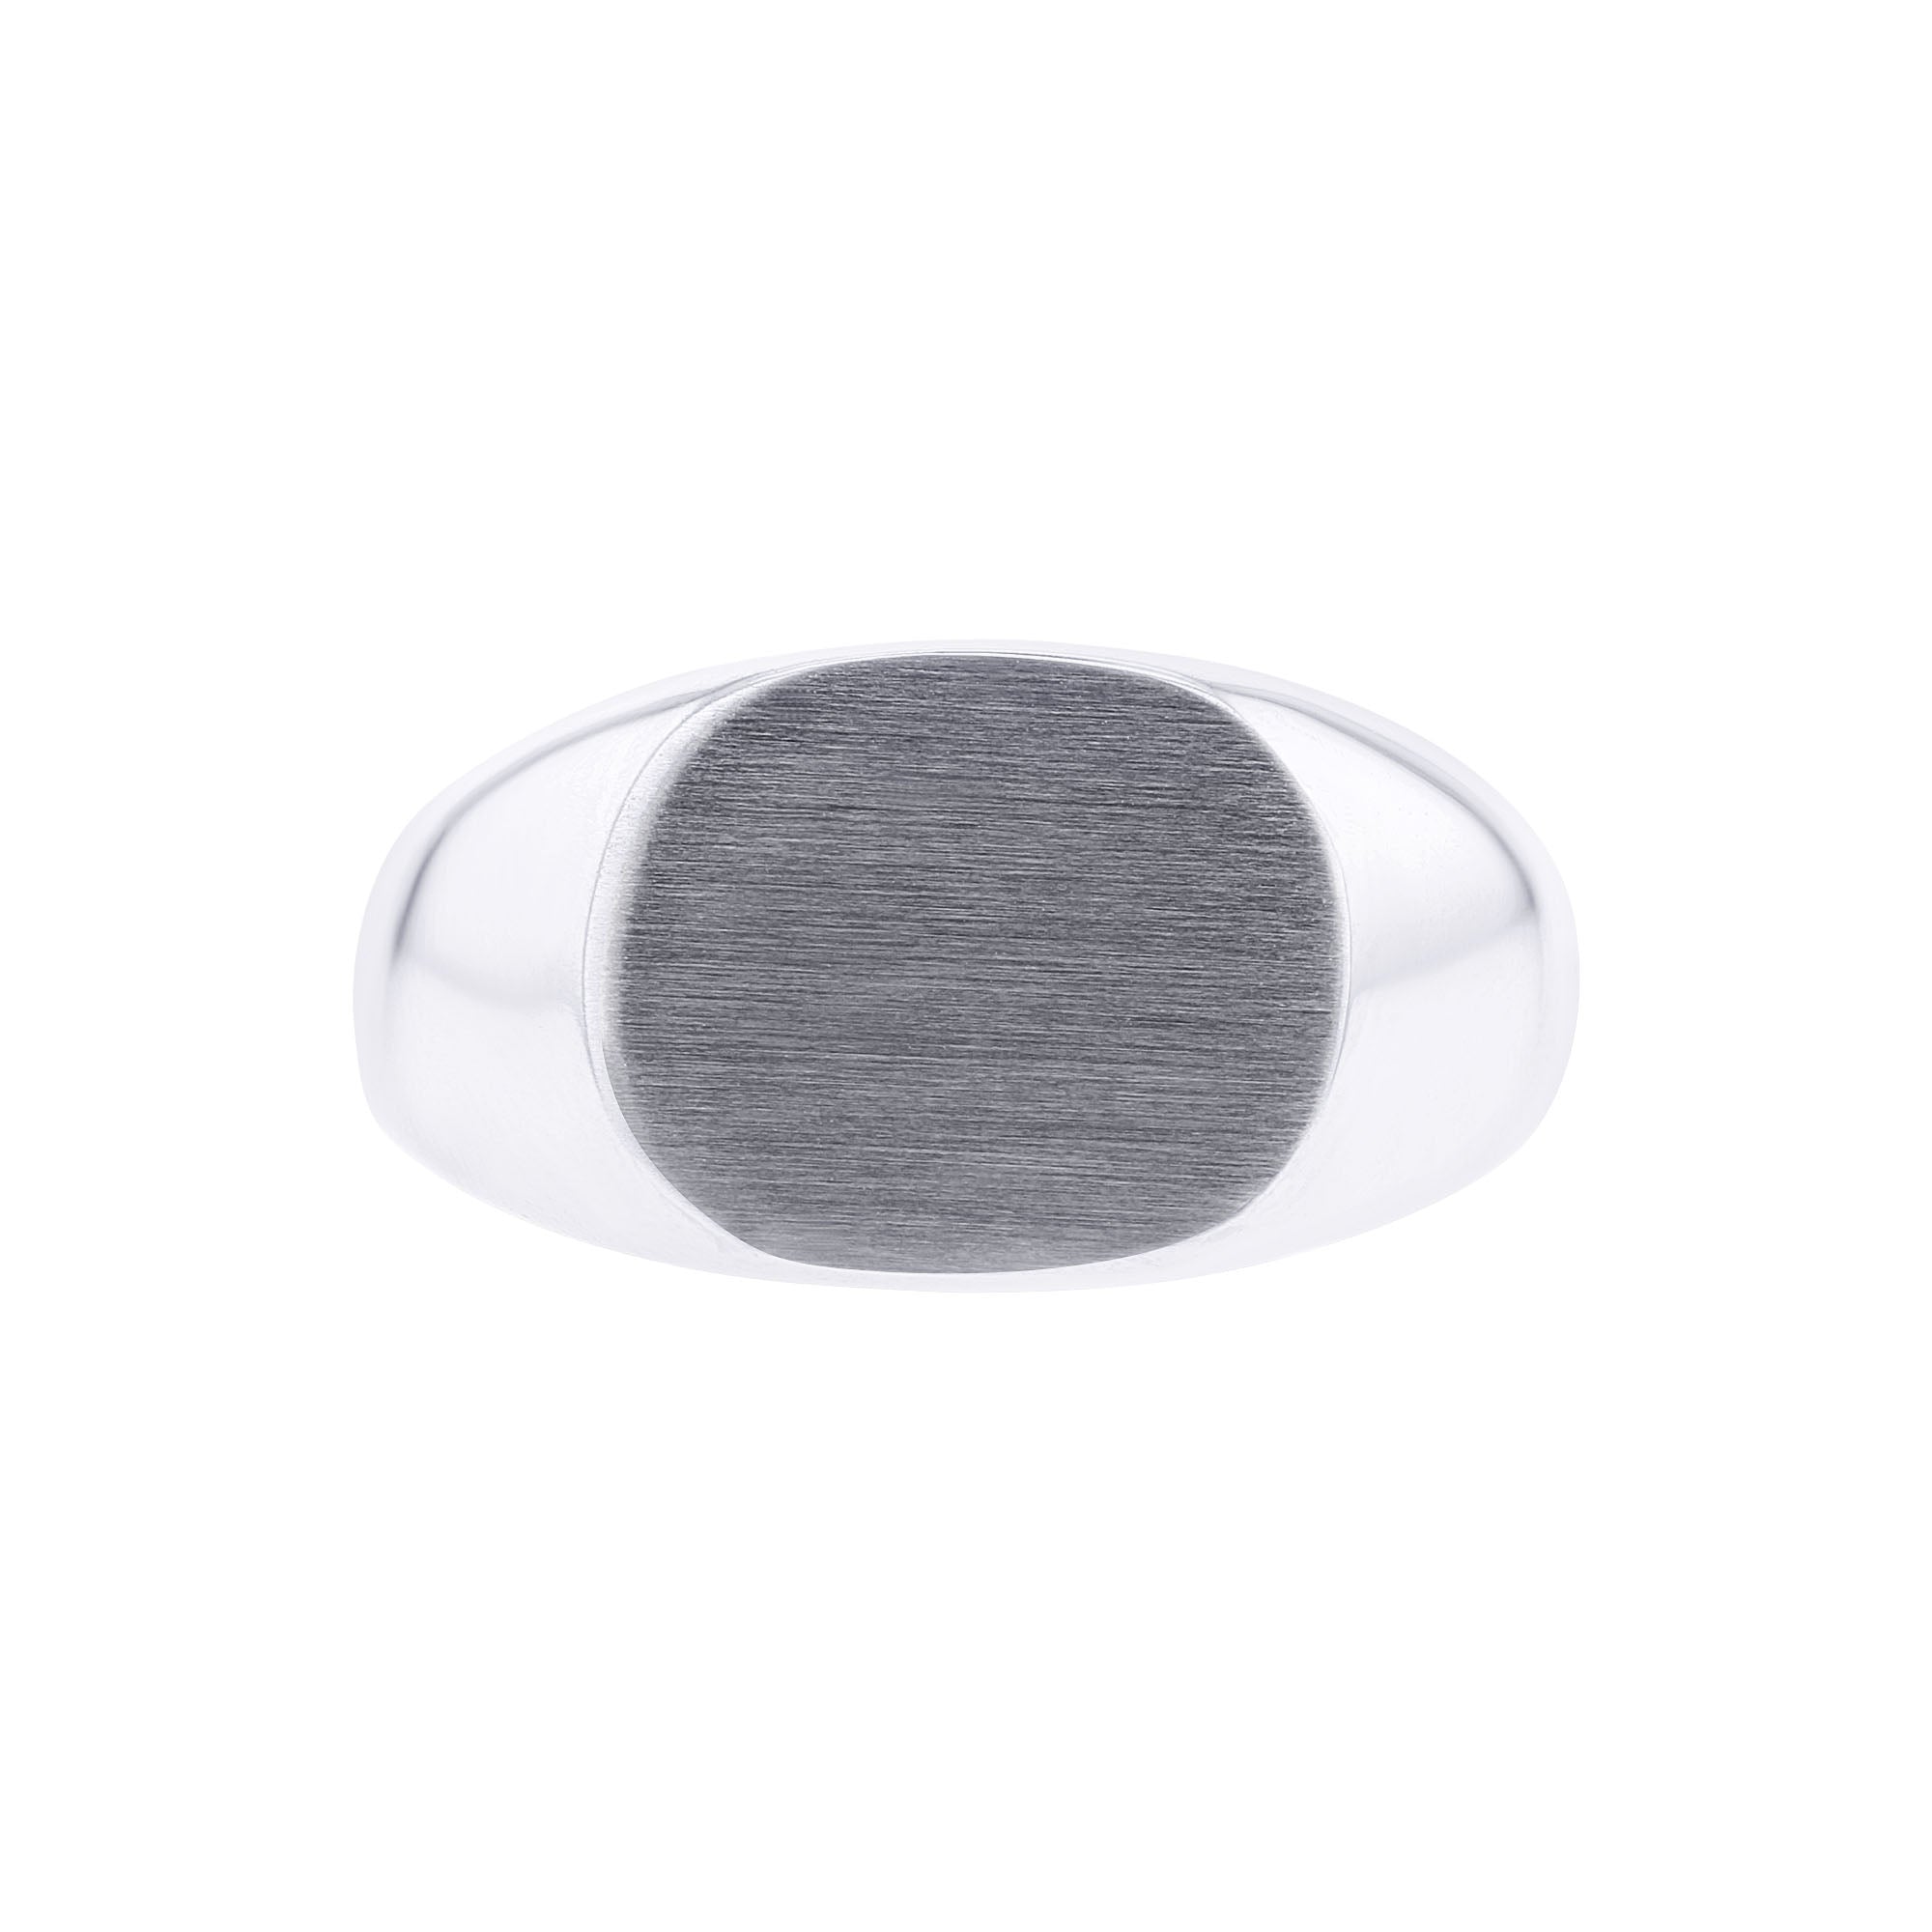 Dashiell Stainless Steel Ring